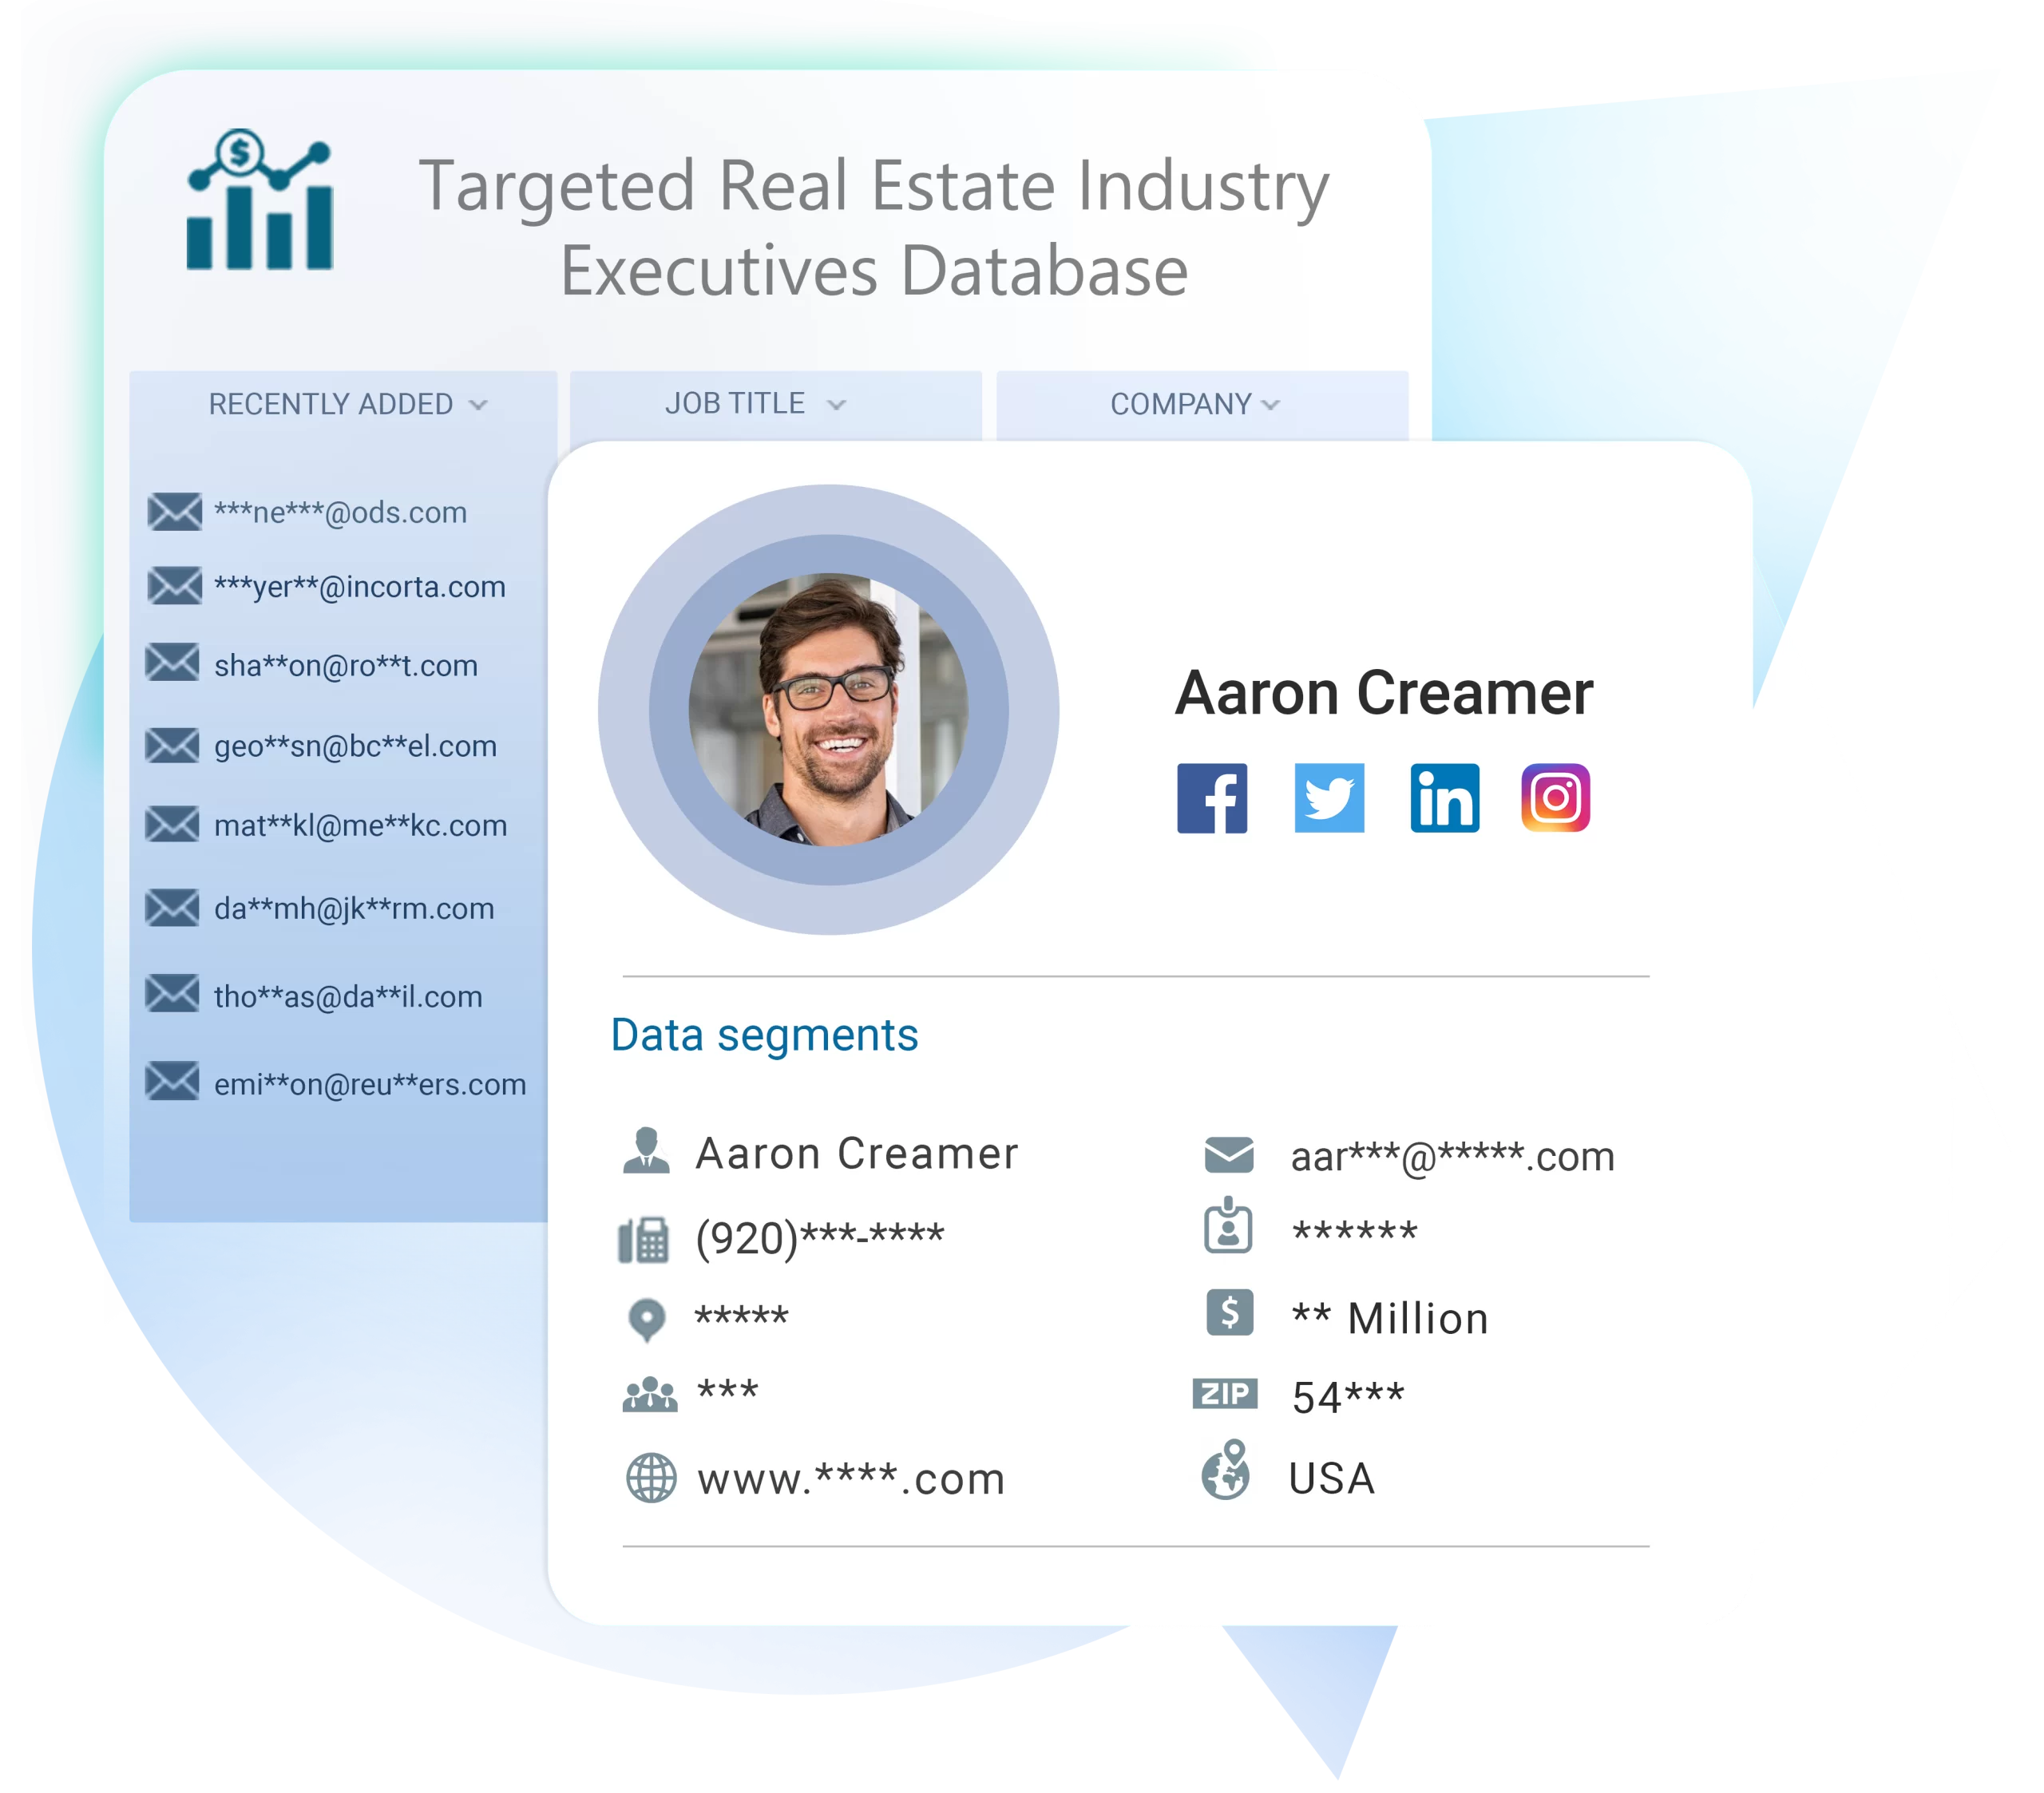 Real Estate Industry Executives Database